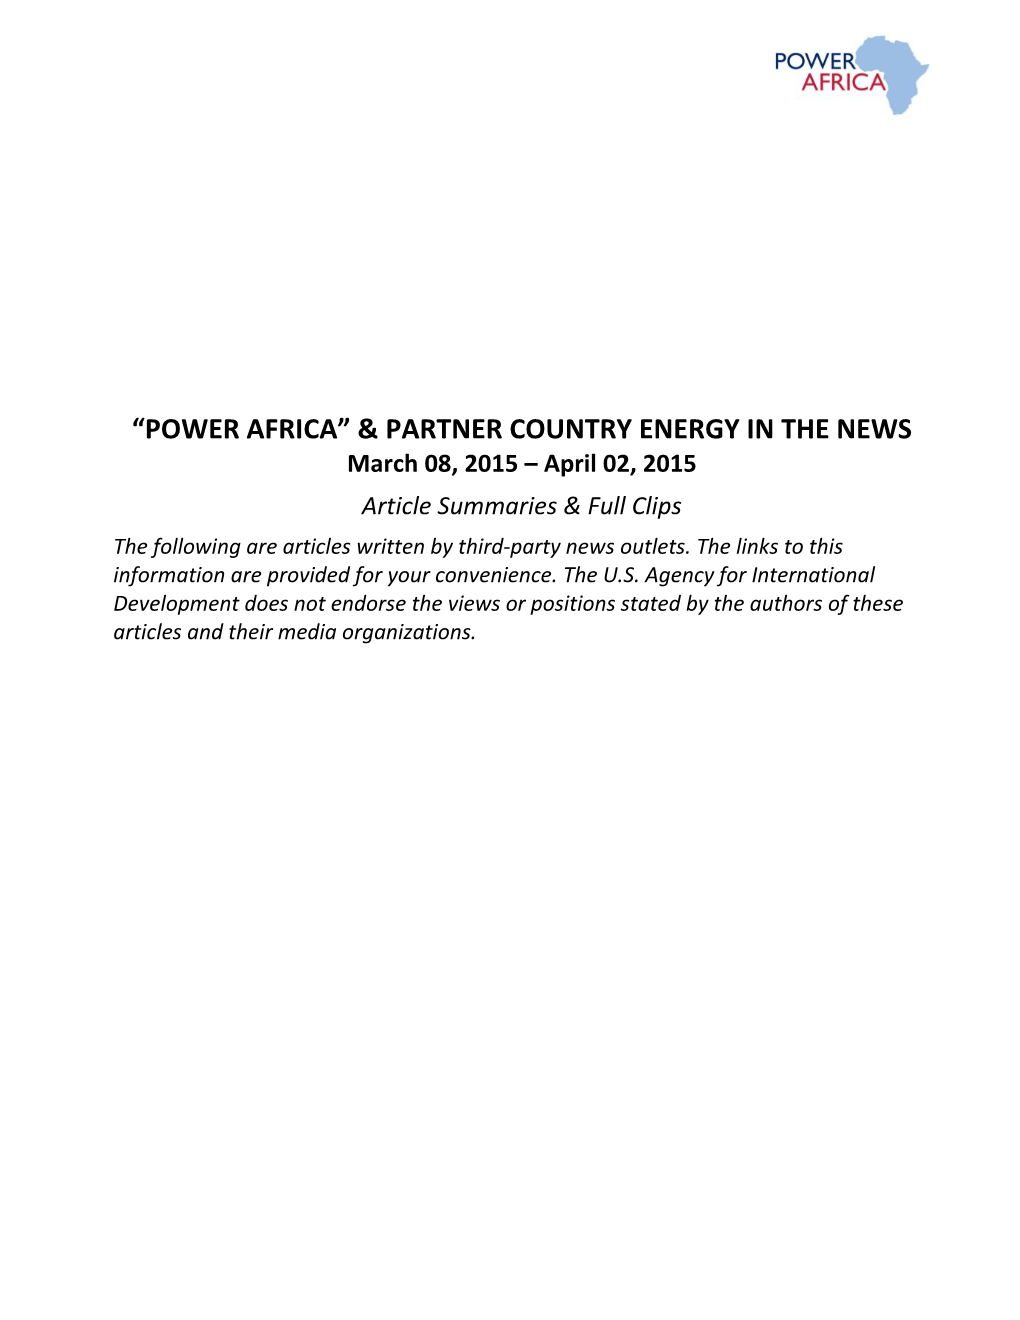 PARTNER COUNTRY ENERGY in the NEWS March 08, 2015 – April 02, 2015 Article Summaries & Full Clips the Following Are Articles Written by Third-Party News Outlets